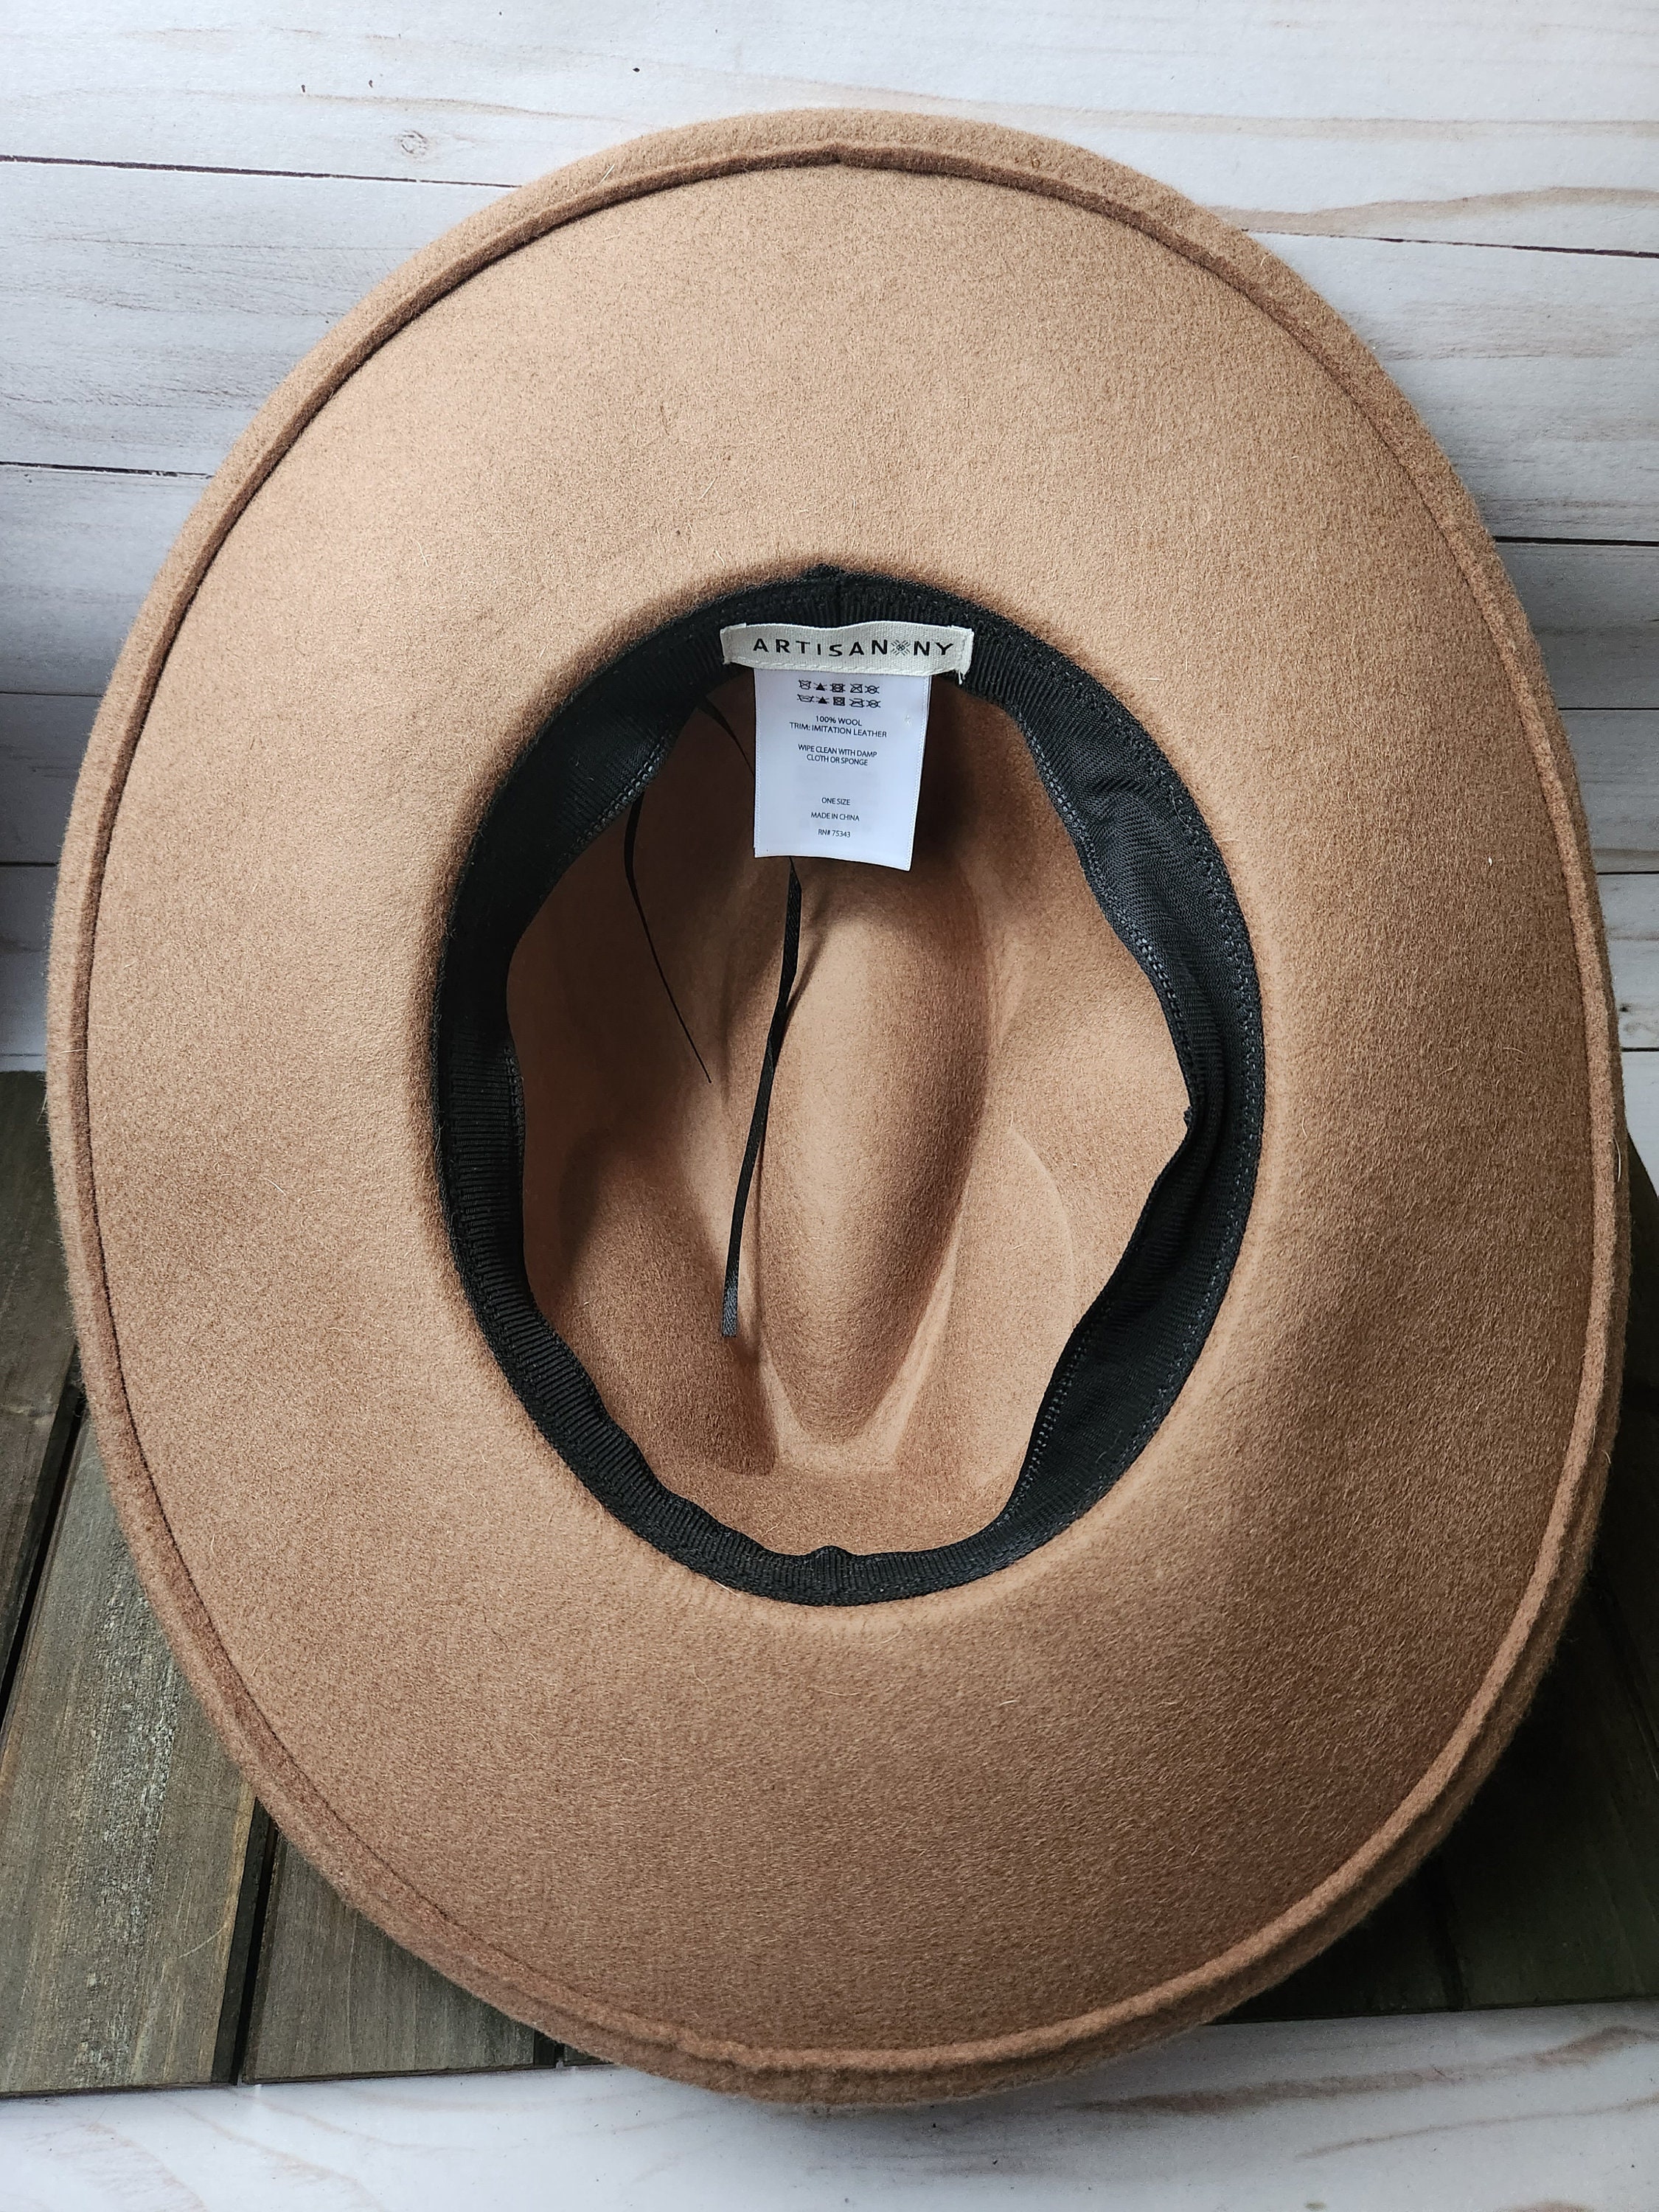 TAN FELT HAT W NUDE BAND - The Crowned Bird